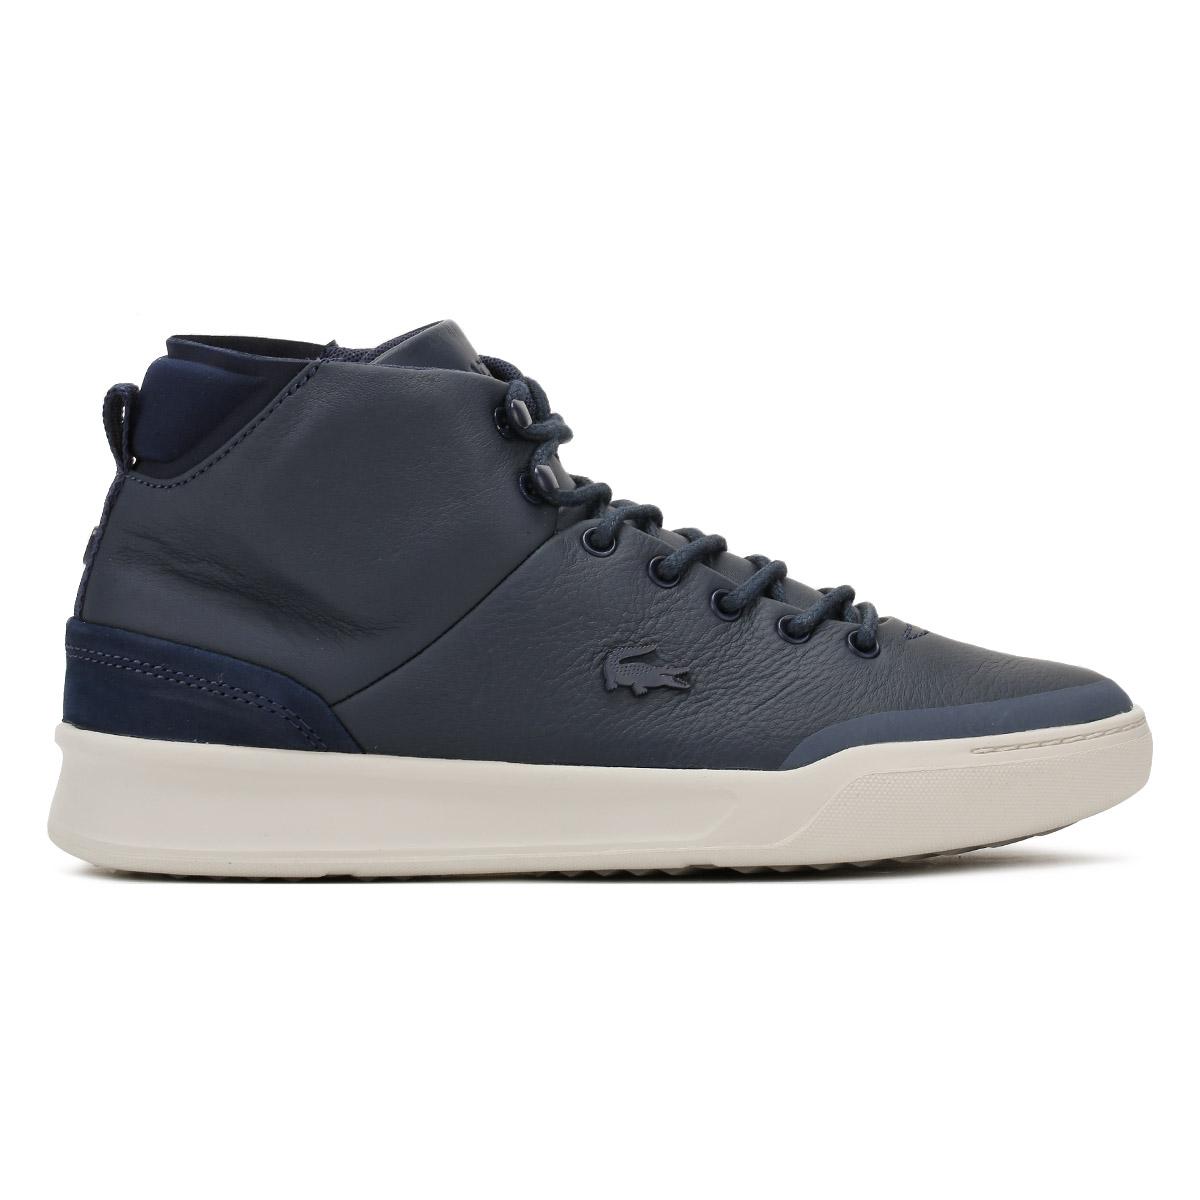 New Mens Lacoste Navy Explorateur Leather Trainers Hi Top Lace Up